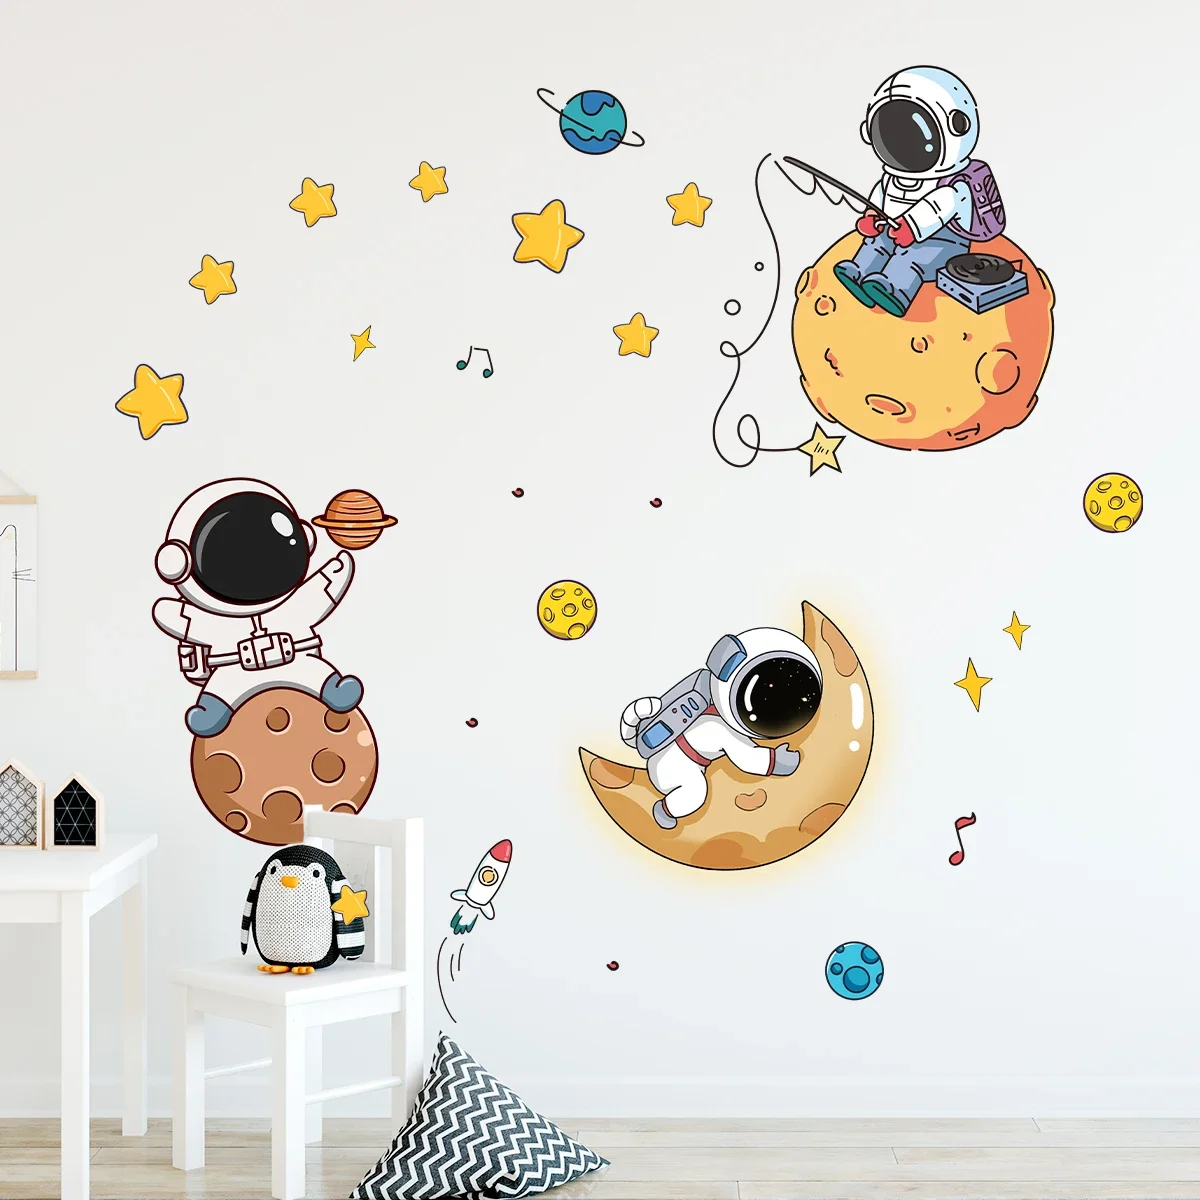 1pc Cartoon Planet Moon Star Astronaut Wall Stickers for Kids Room Children Room Bedroom Living Room Home Decoration Wall Decal